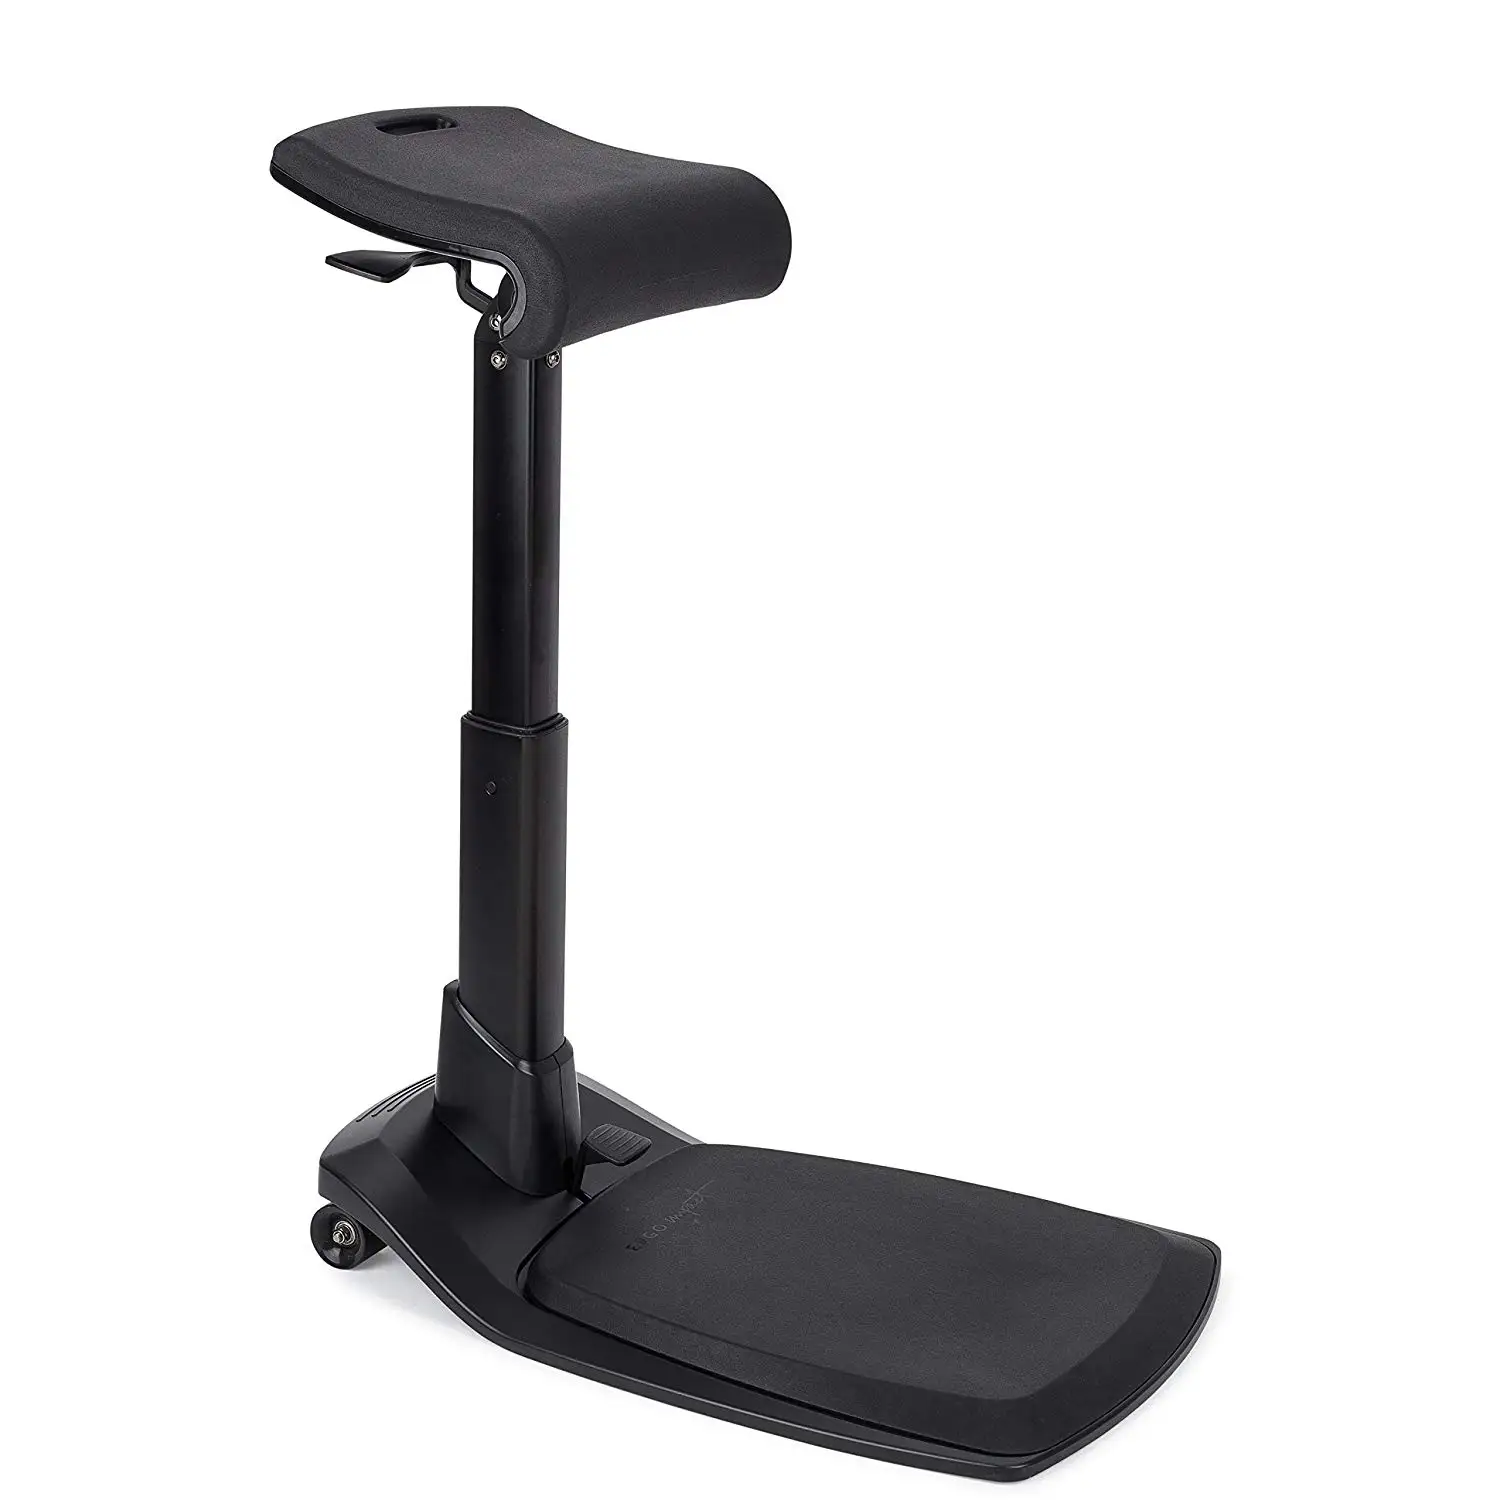 Cheap Standing Desk Chair, find Standing Desk Chair deals on line at